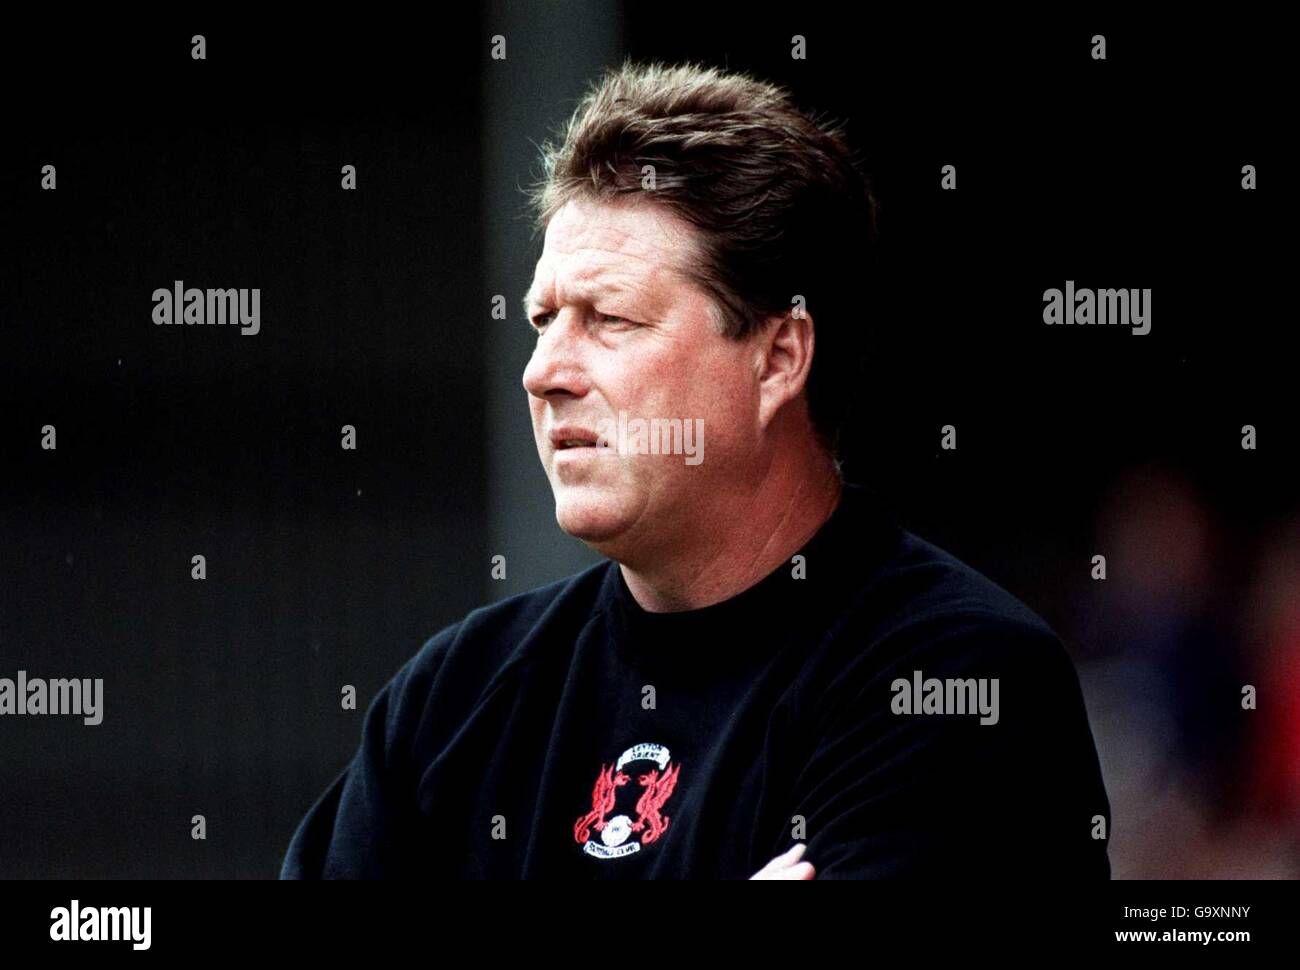 Soccer - Nationwide League Division Three - Leyton Orient v Carlisle United. Tommy Taylor, Leyton Orient manager Stock Photo